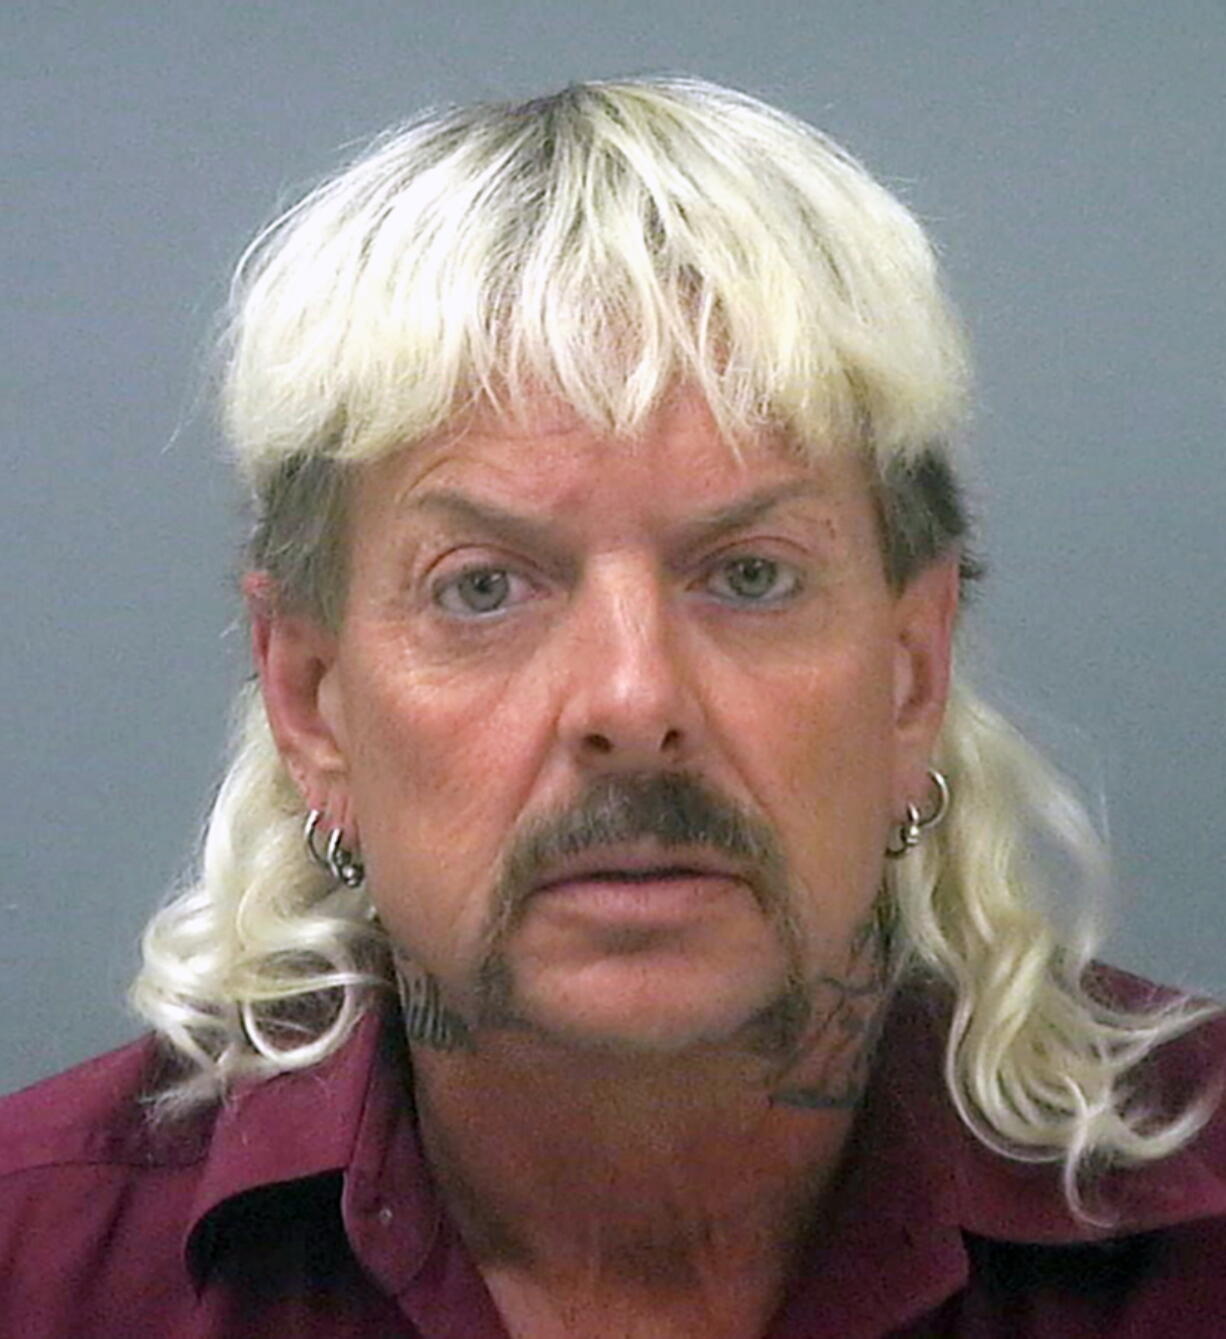 FILE - This undated file photo provided by the Santa Rose County Jail in Milton, Fla., shows Joseph Maldonado-Passage, also known as Joe Exotic.